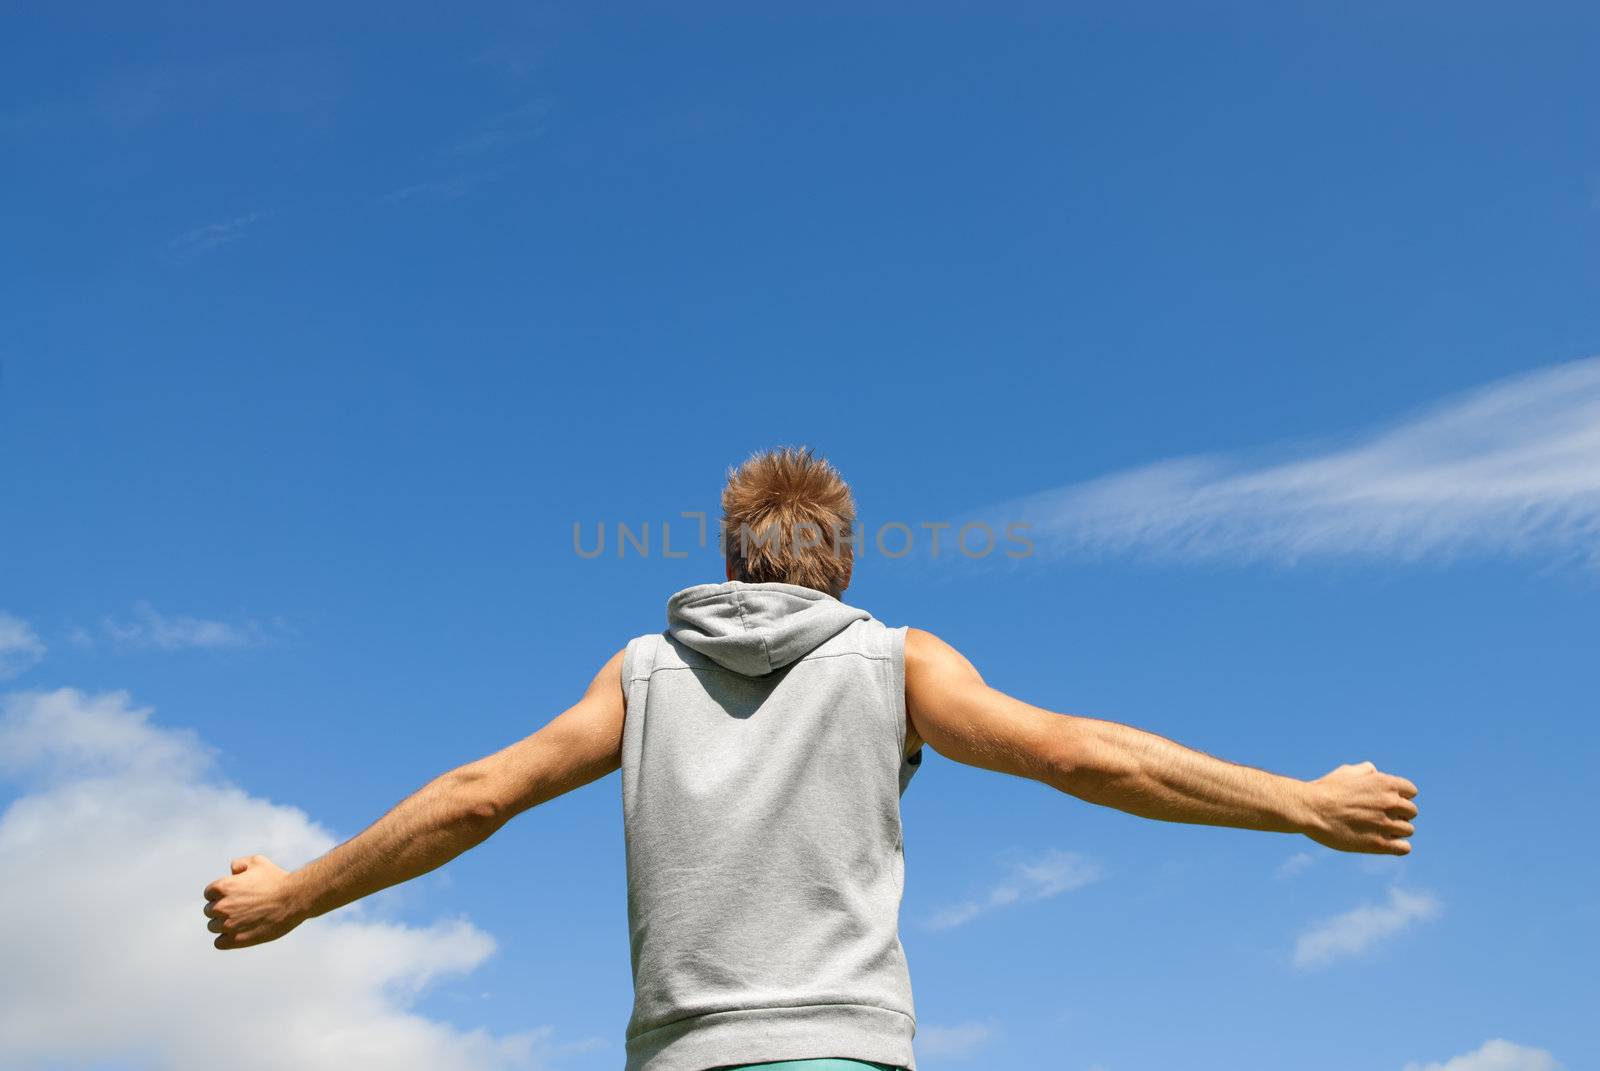 Guy in sports clothing, with his arms spread, looking at blue sky.